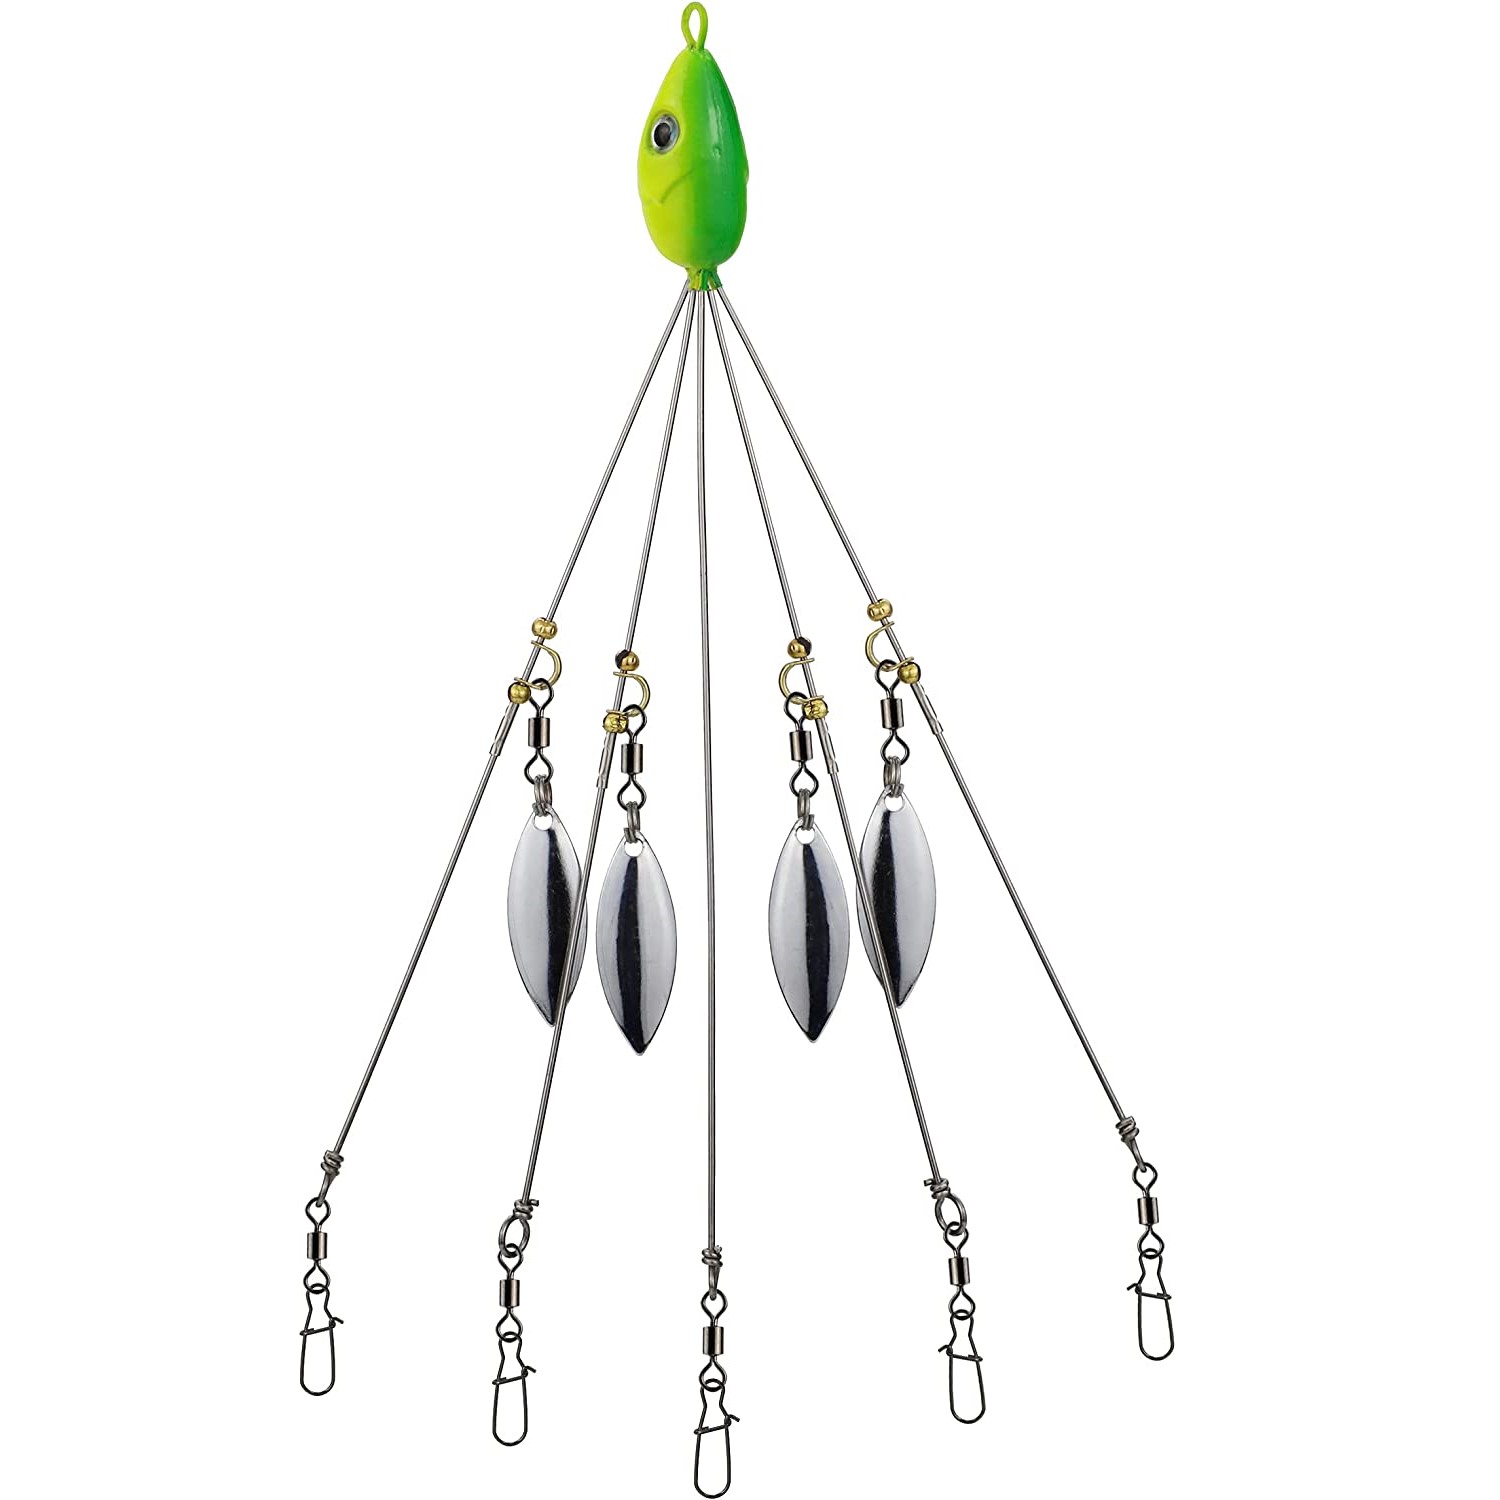 Alabama Rig Umbrella for Bass Fishing Kit with Willow Bladed Spin Jig Heads  Freshwater Salwater Trout Stripers Lures 3 Arms, Bait Rigs -  Canada